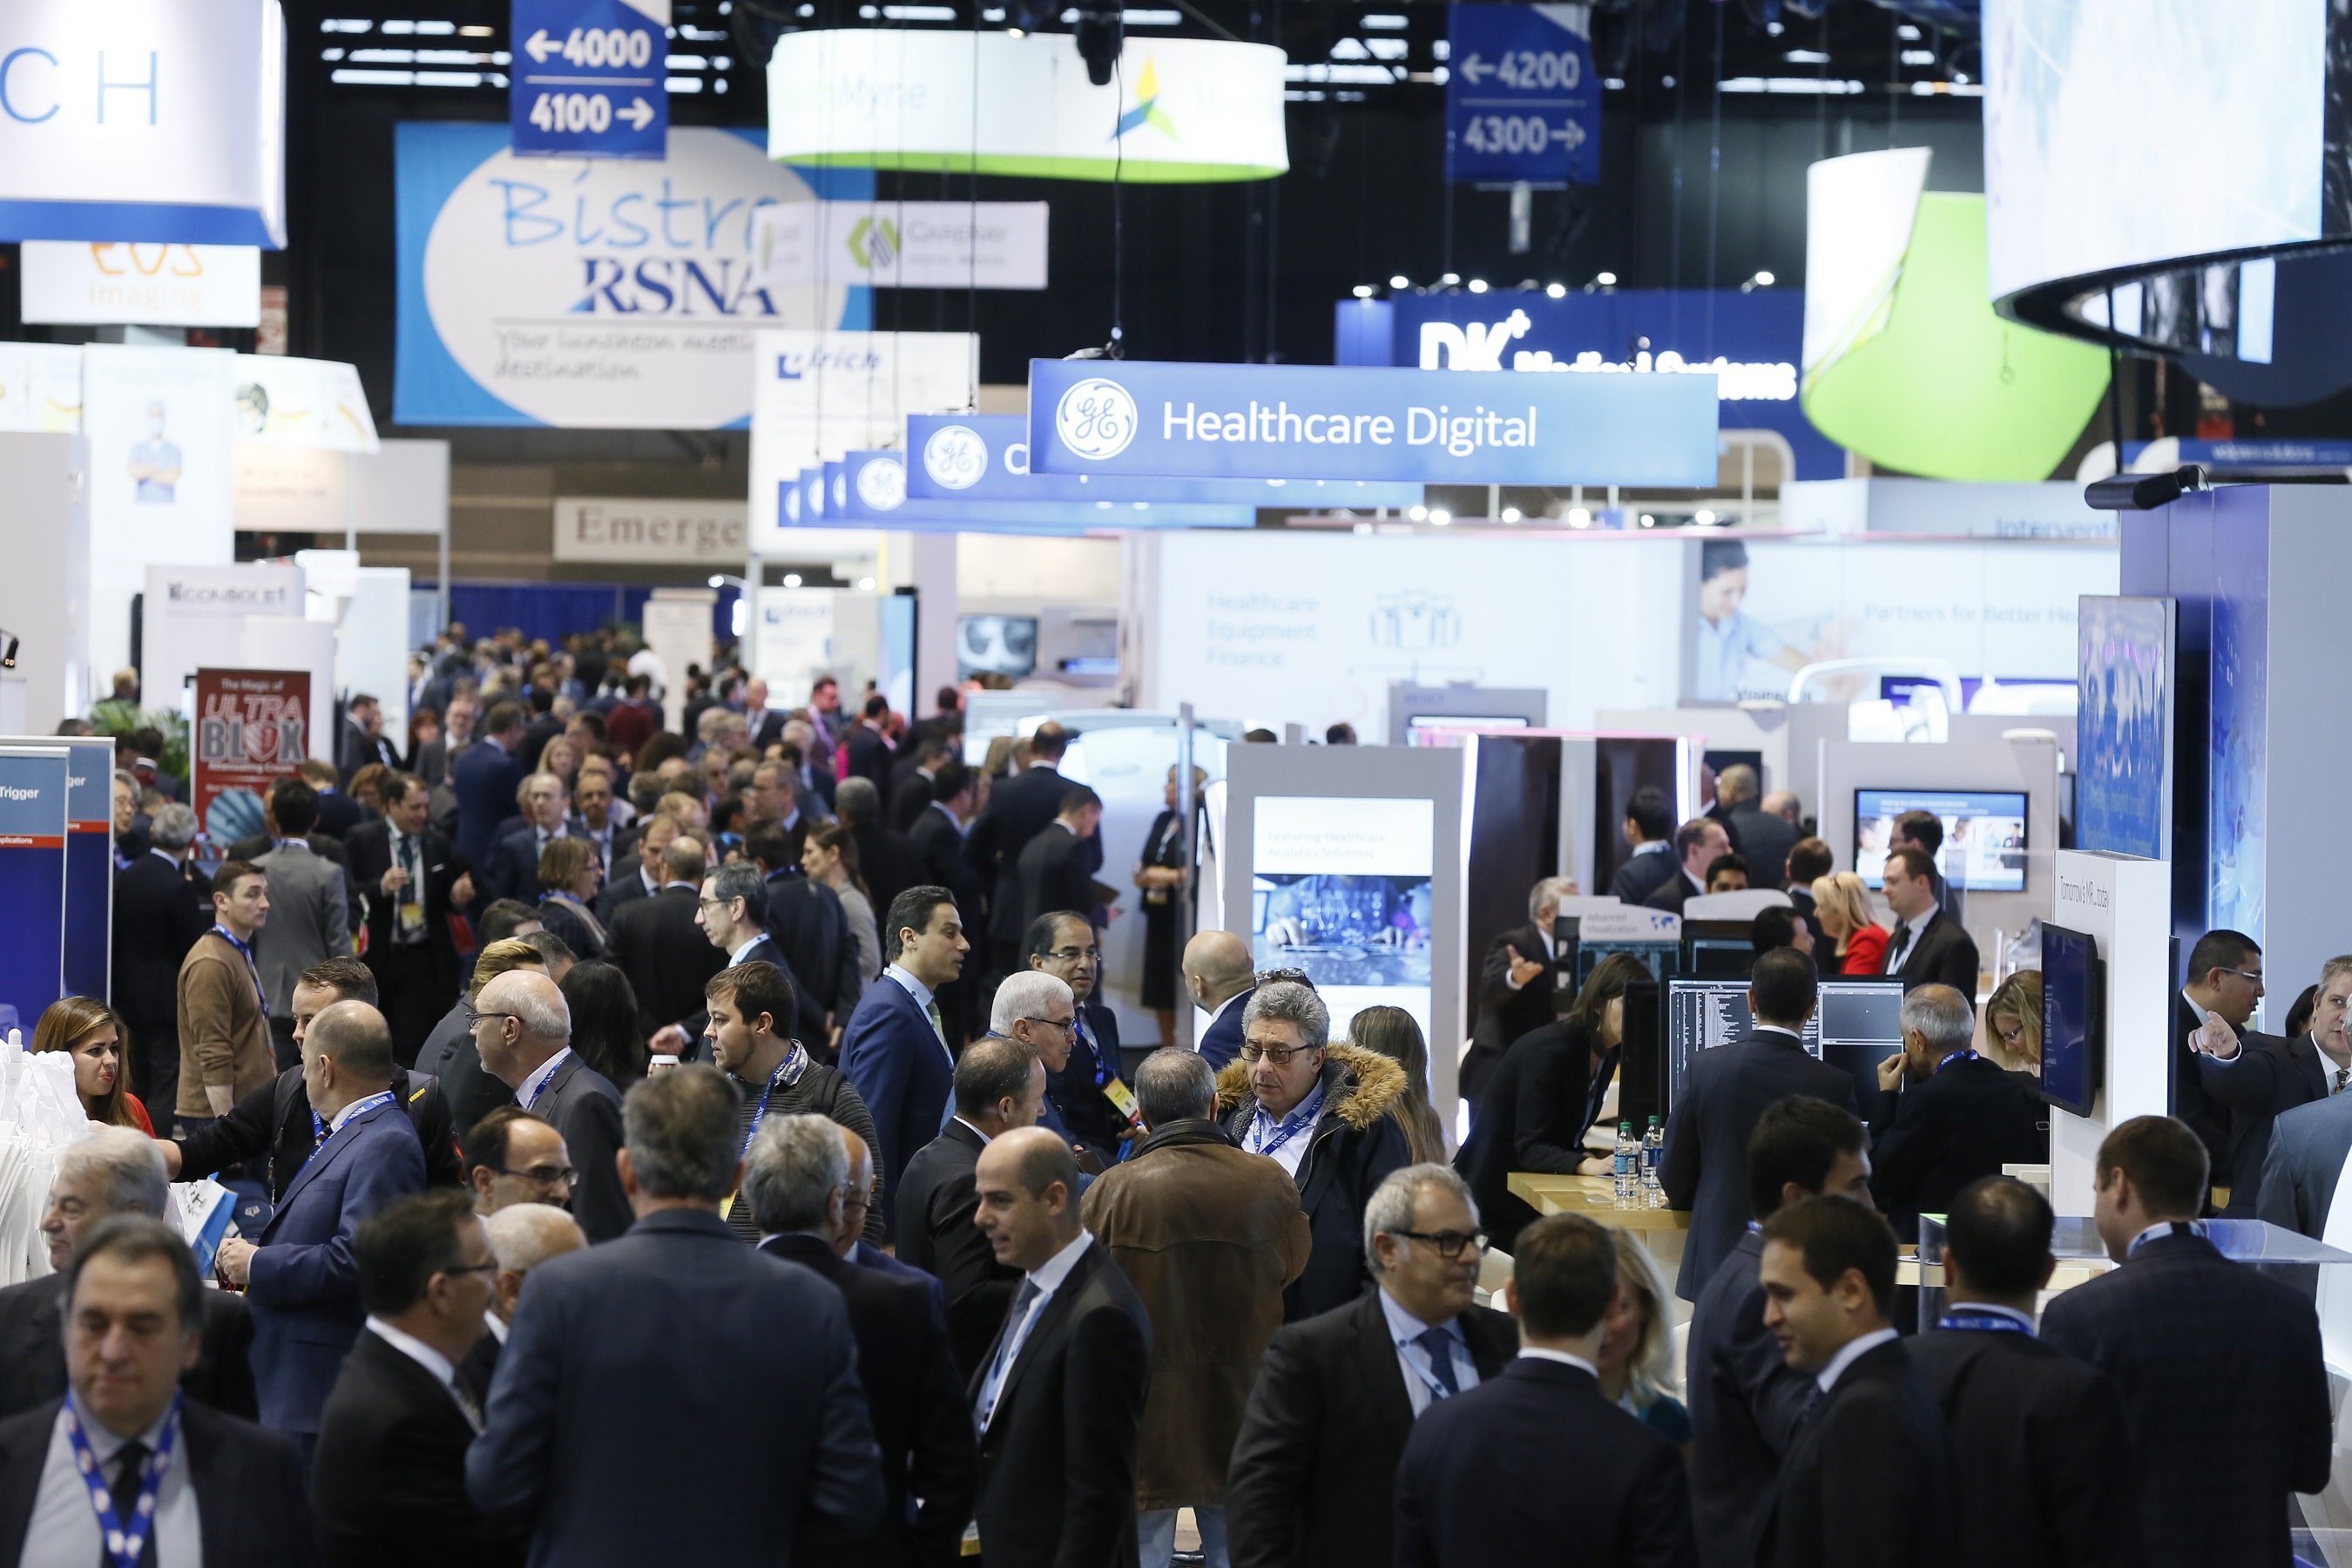 The Radiological Society of North America’s (RSNA) 108th Scientific Assembly and Annual Meeting (RSNA22) took place at Chicago’s McCormick Place Nov, 27- Dec. 1, carrying through its theme of “Empowering Patients and Partners in Care.”